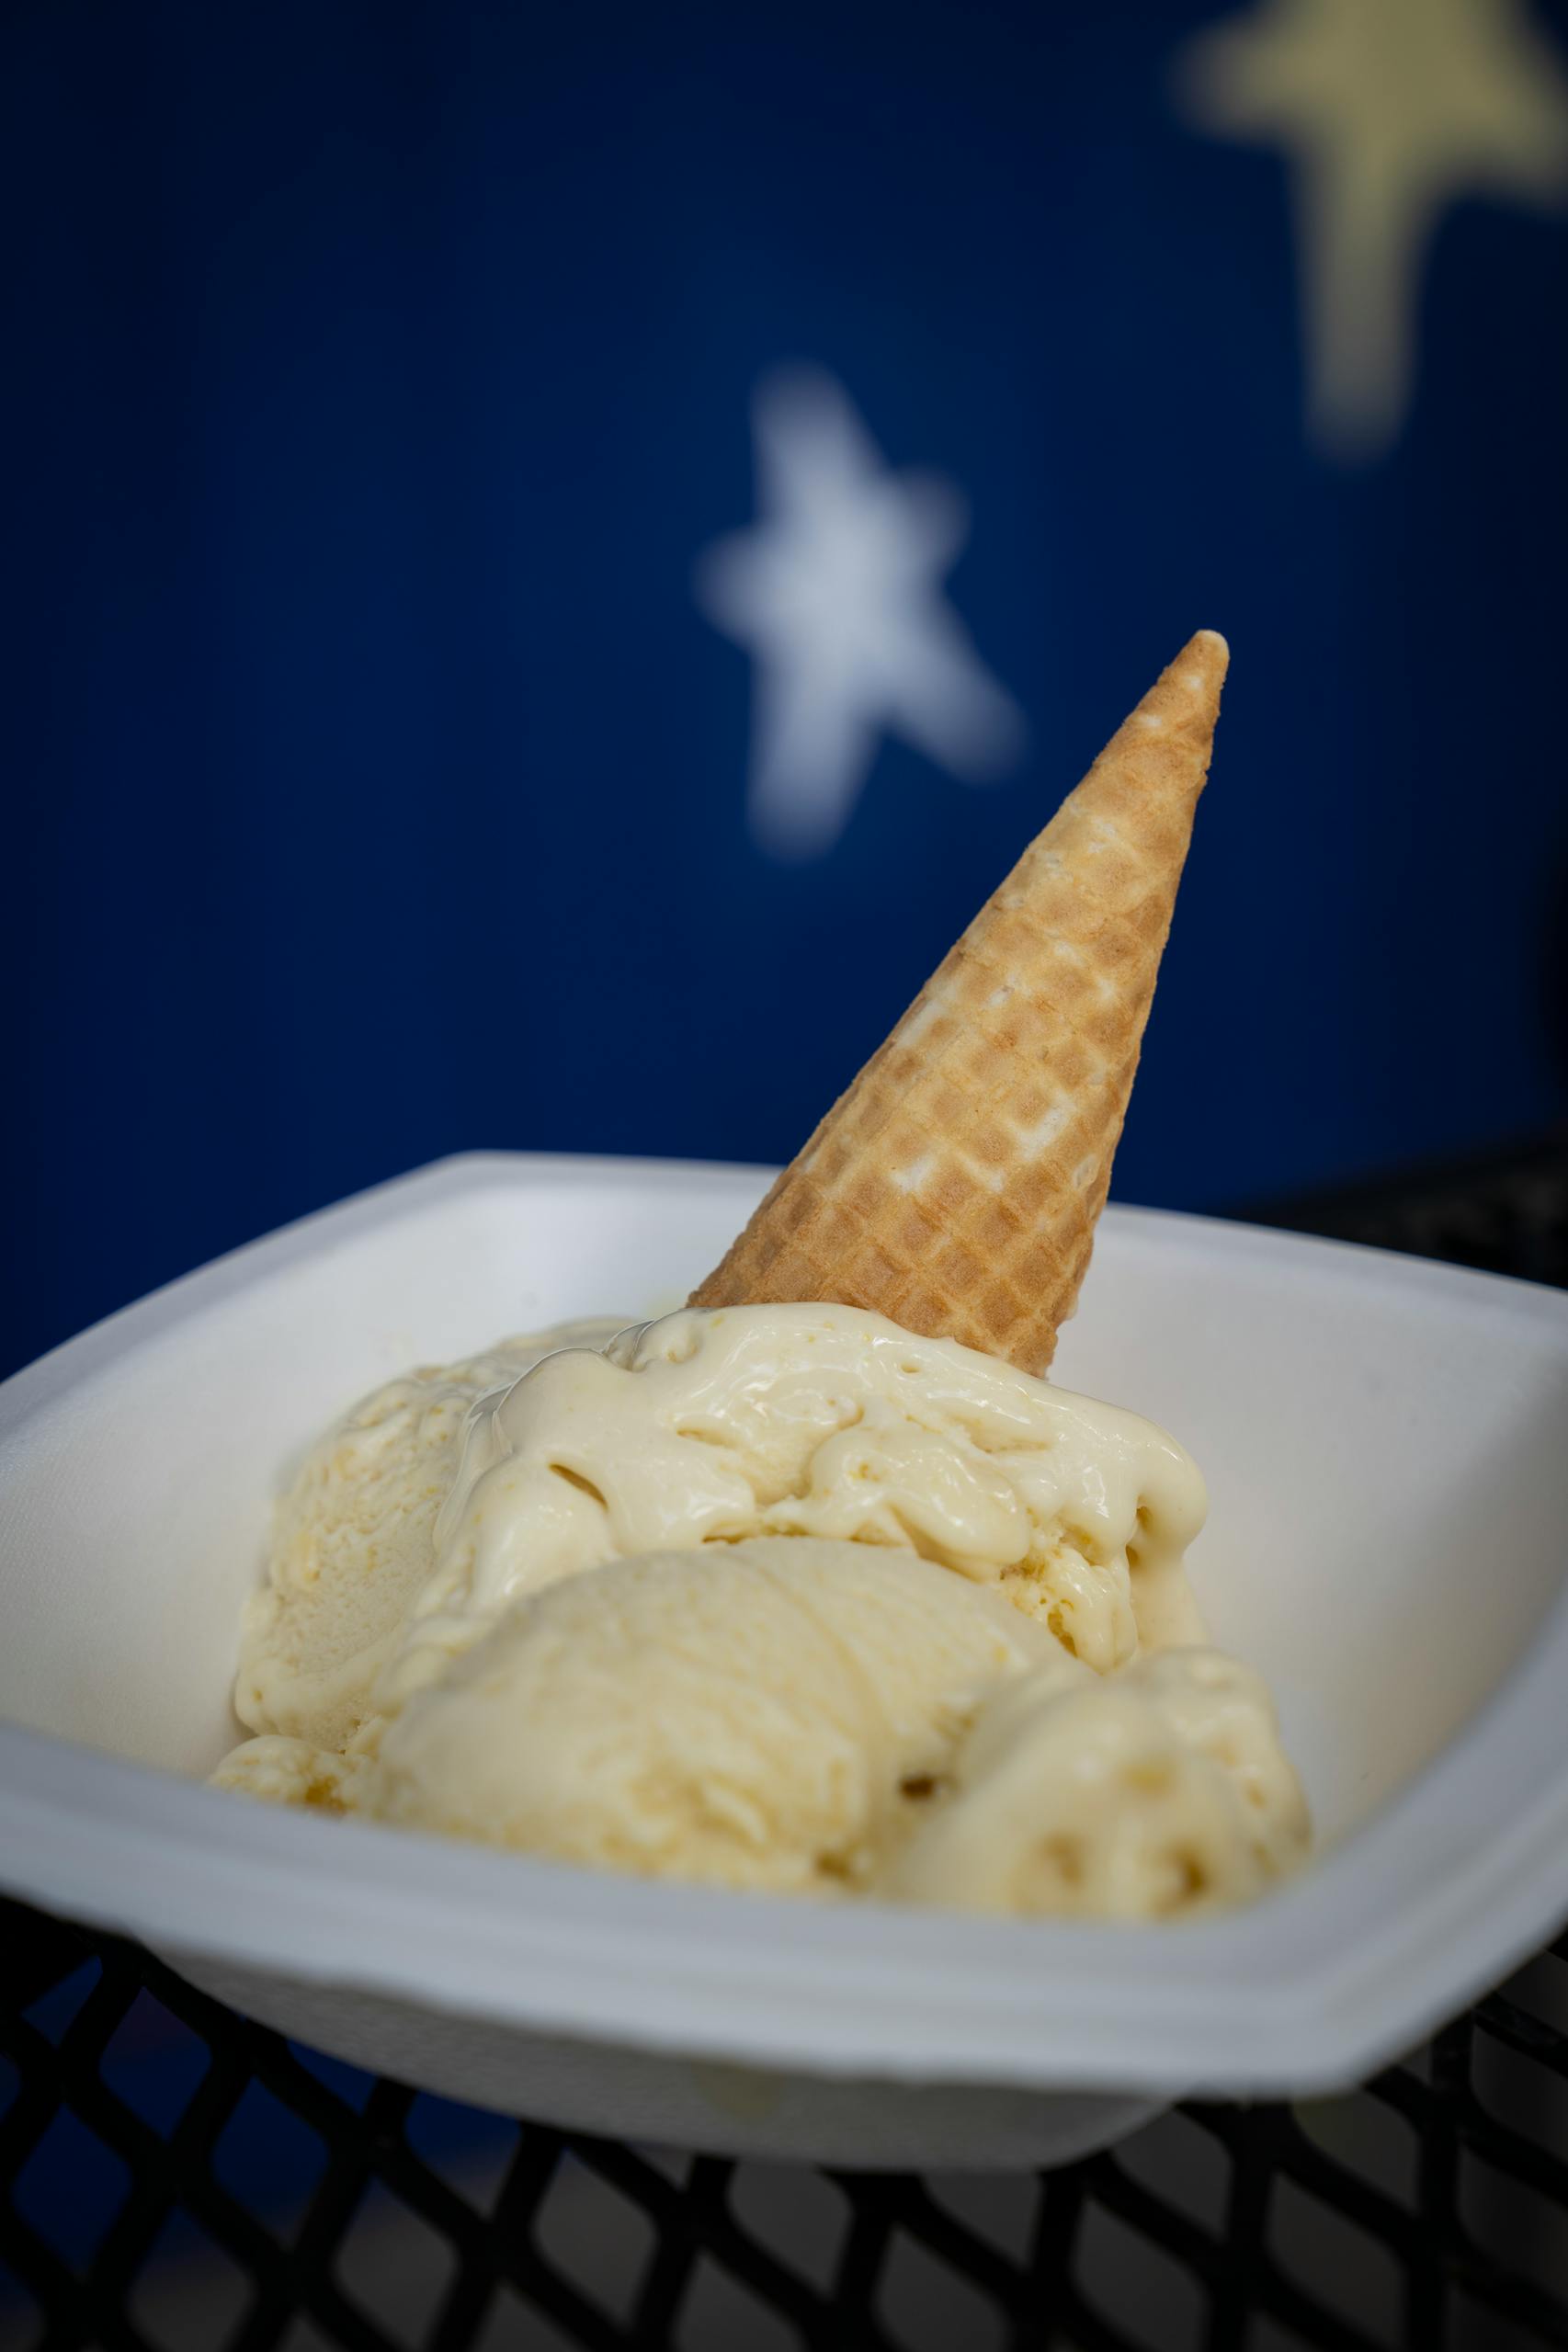 Sweet corn ice cream from Blue Moon Dine-In Theater. The new foods of the 2023 Minnesota State Fair photographed on the first day of the fair in Falcon Heights, Minn. on Tuesday, Aug. 8, 2023. ] LEILA NAVIDI • leila.navidi@startribune.com